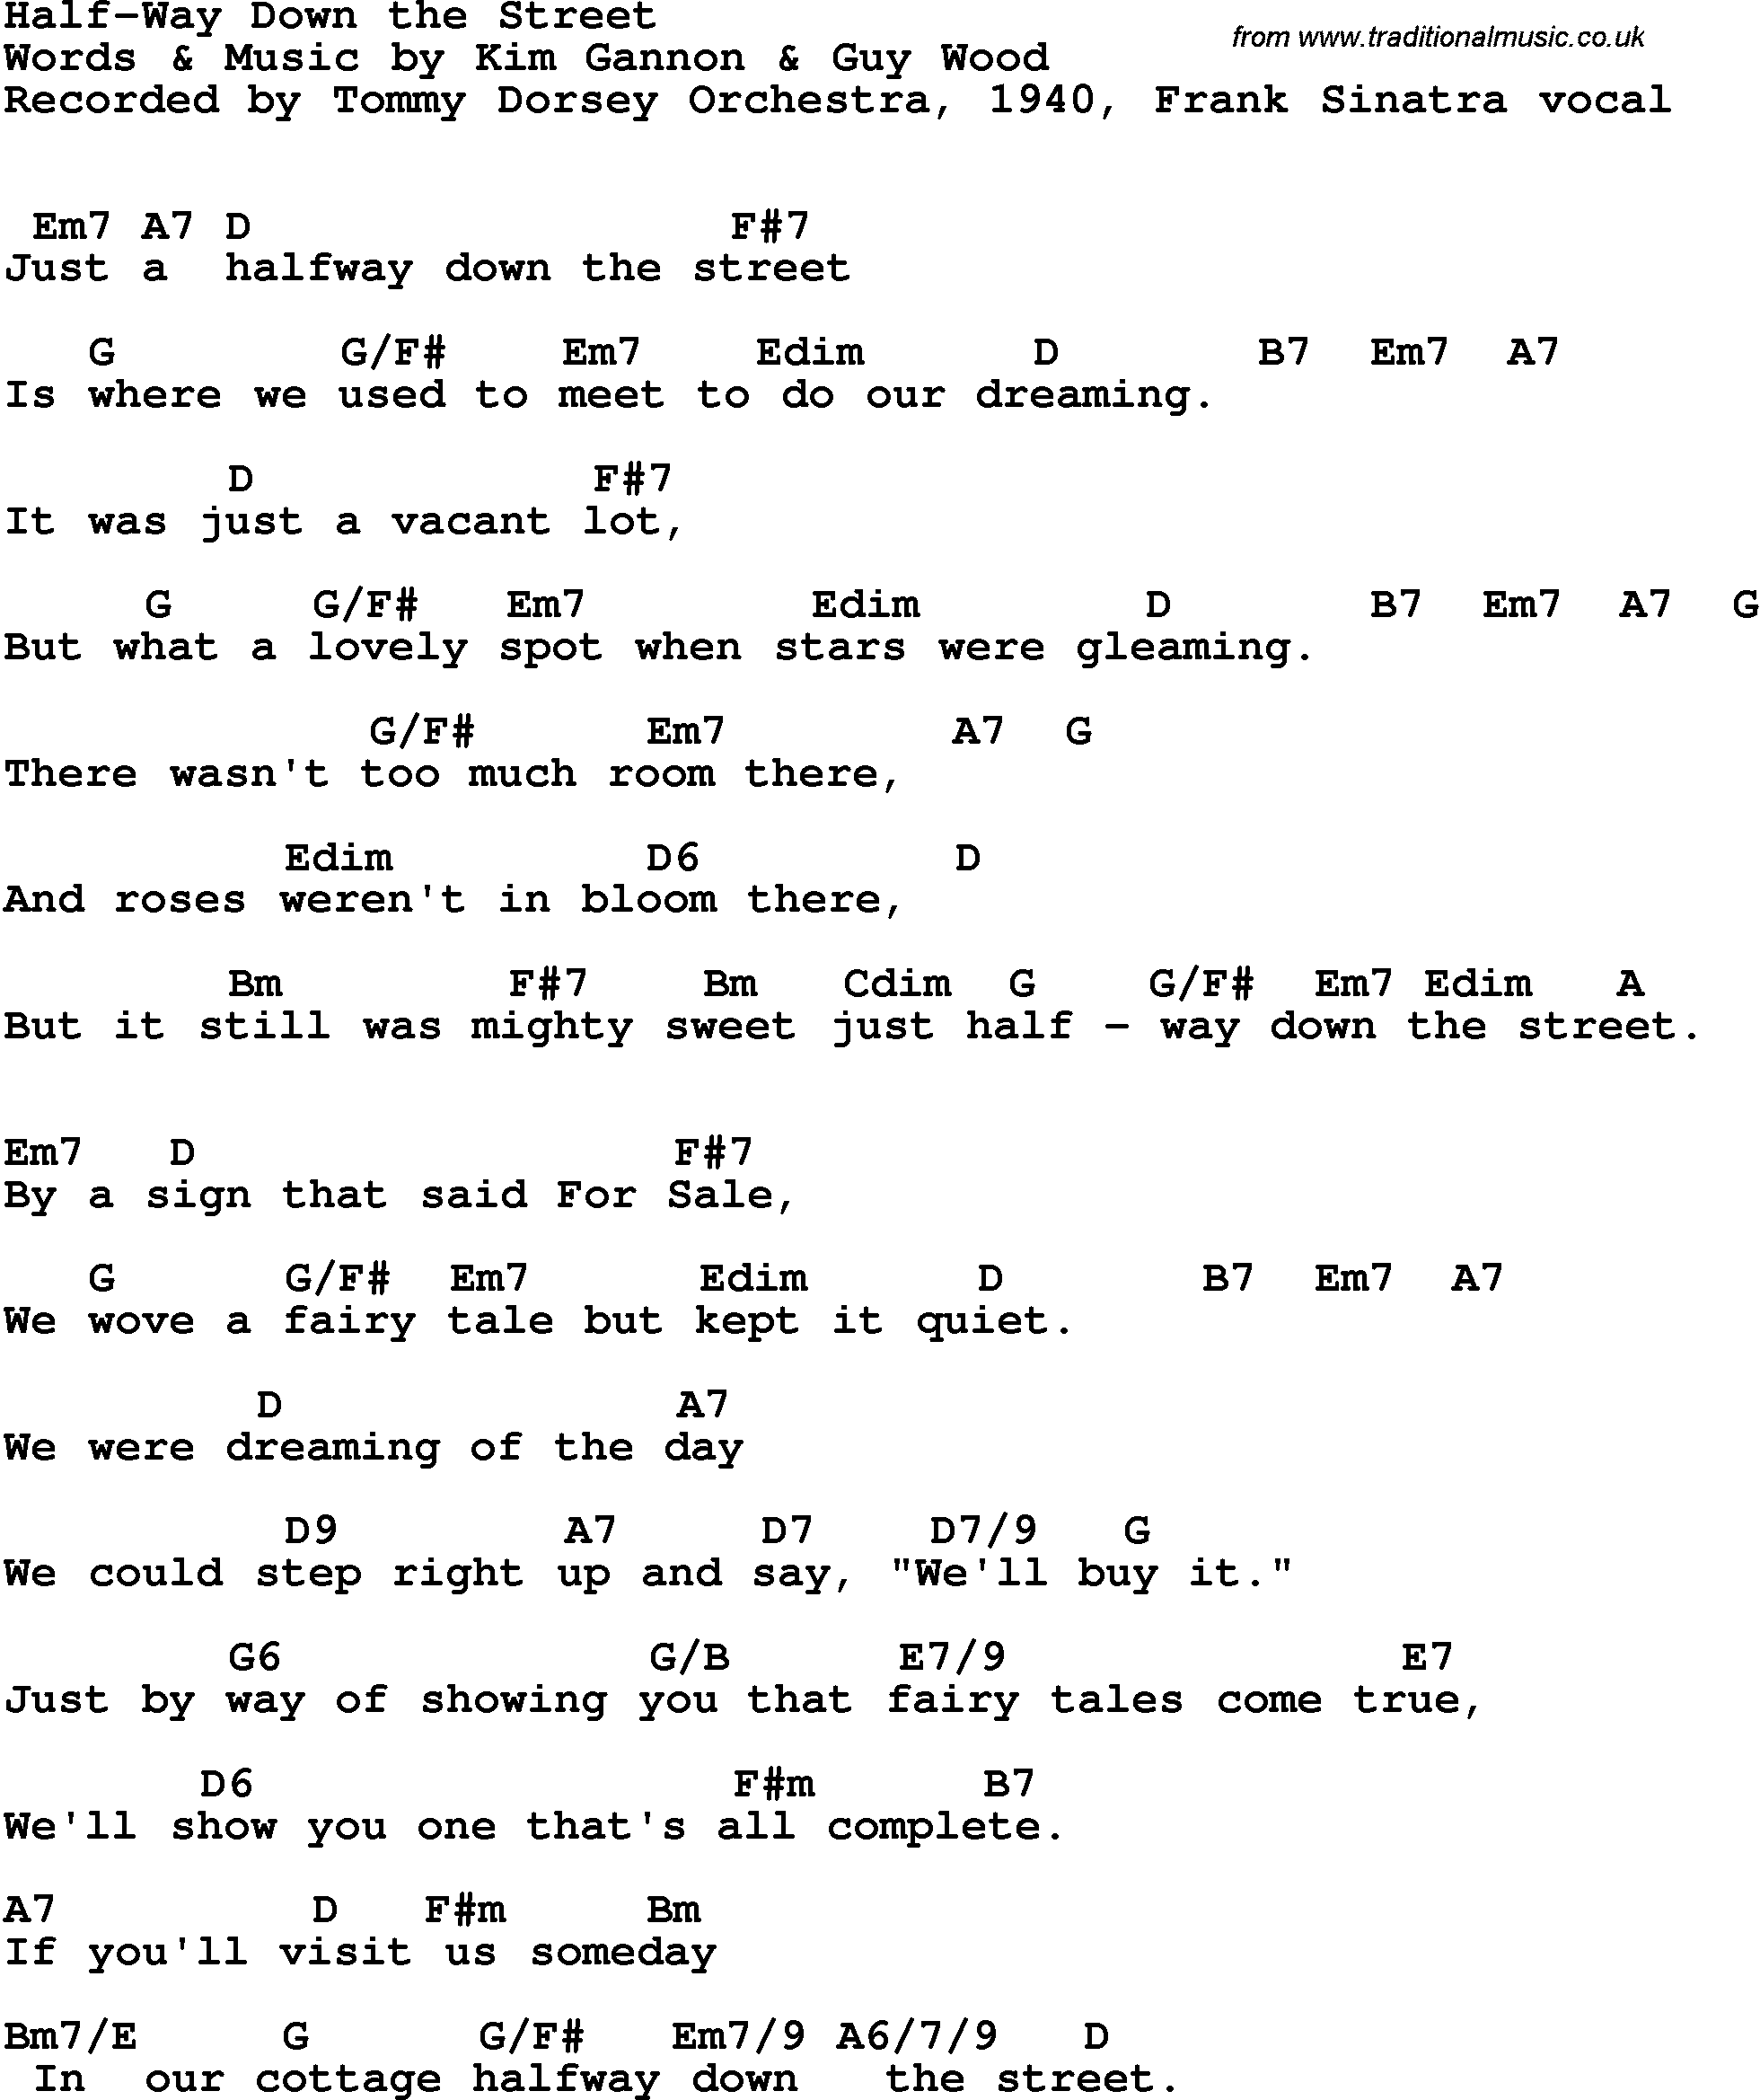 Song Lyrics with guitar chords for Half-way Down The Street - Tommy Dorsey, 1940, Frank Sinatra Vocal